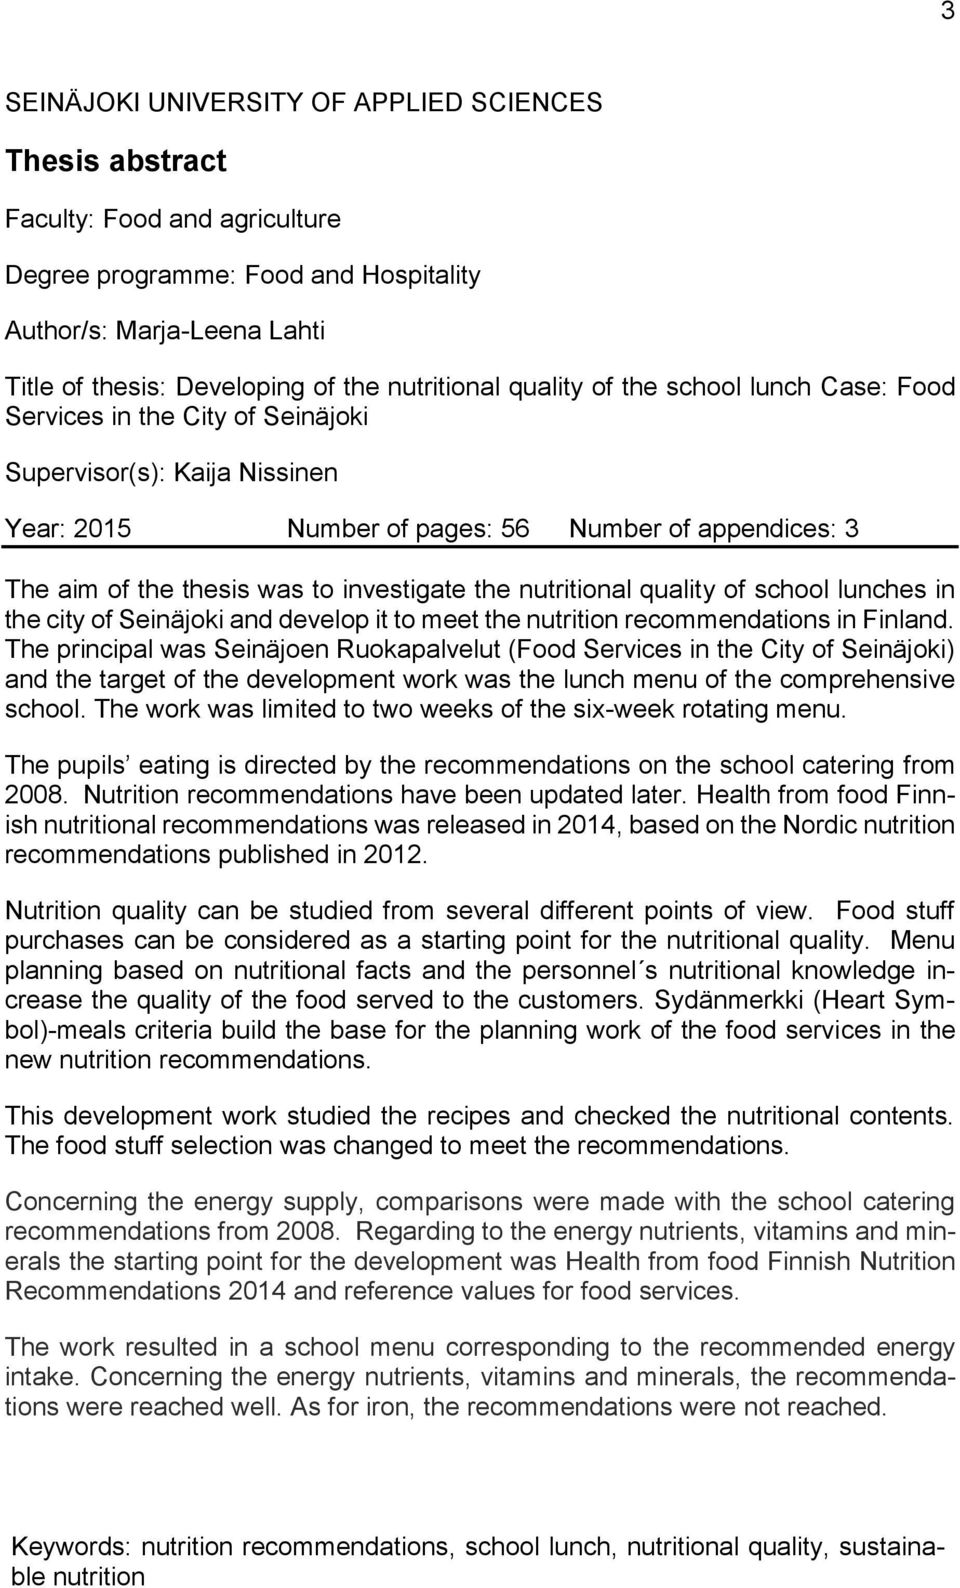 investigate the nutritional quality of school lunches in the city of Seinäjoki and develop it to meet the nutrition recommendations in Finland.